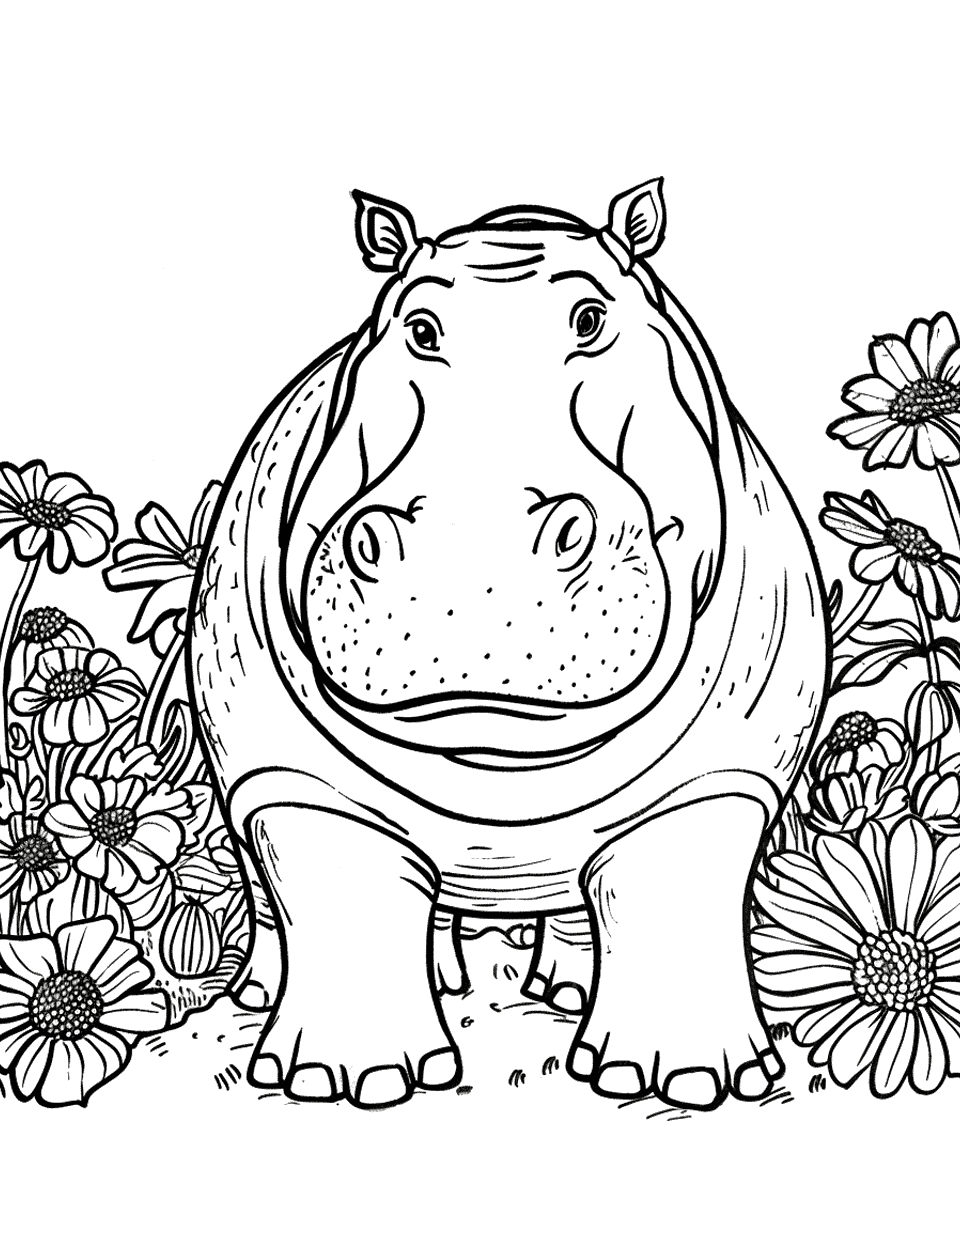 Hippo Gardener Coloring Page - A hippo on a garden, surrounded by colorful flowers.